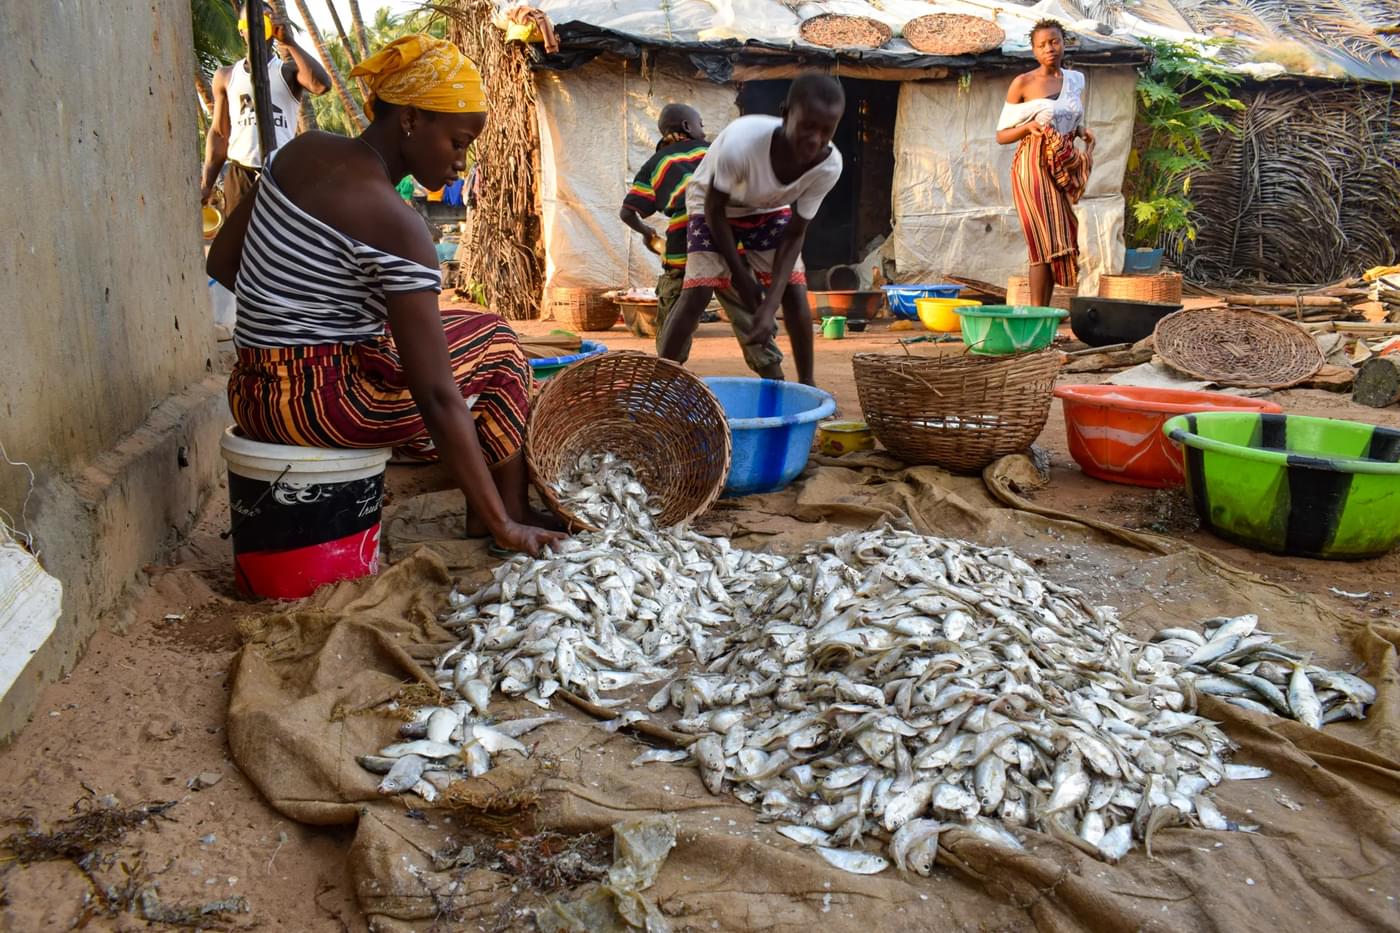 Fishers with their catch in Banda